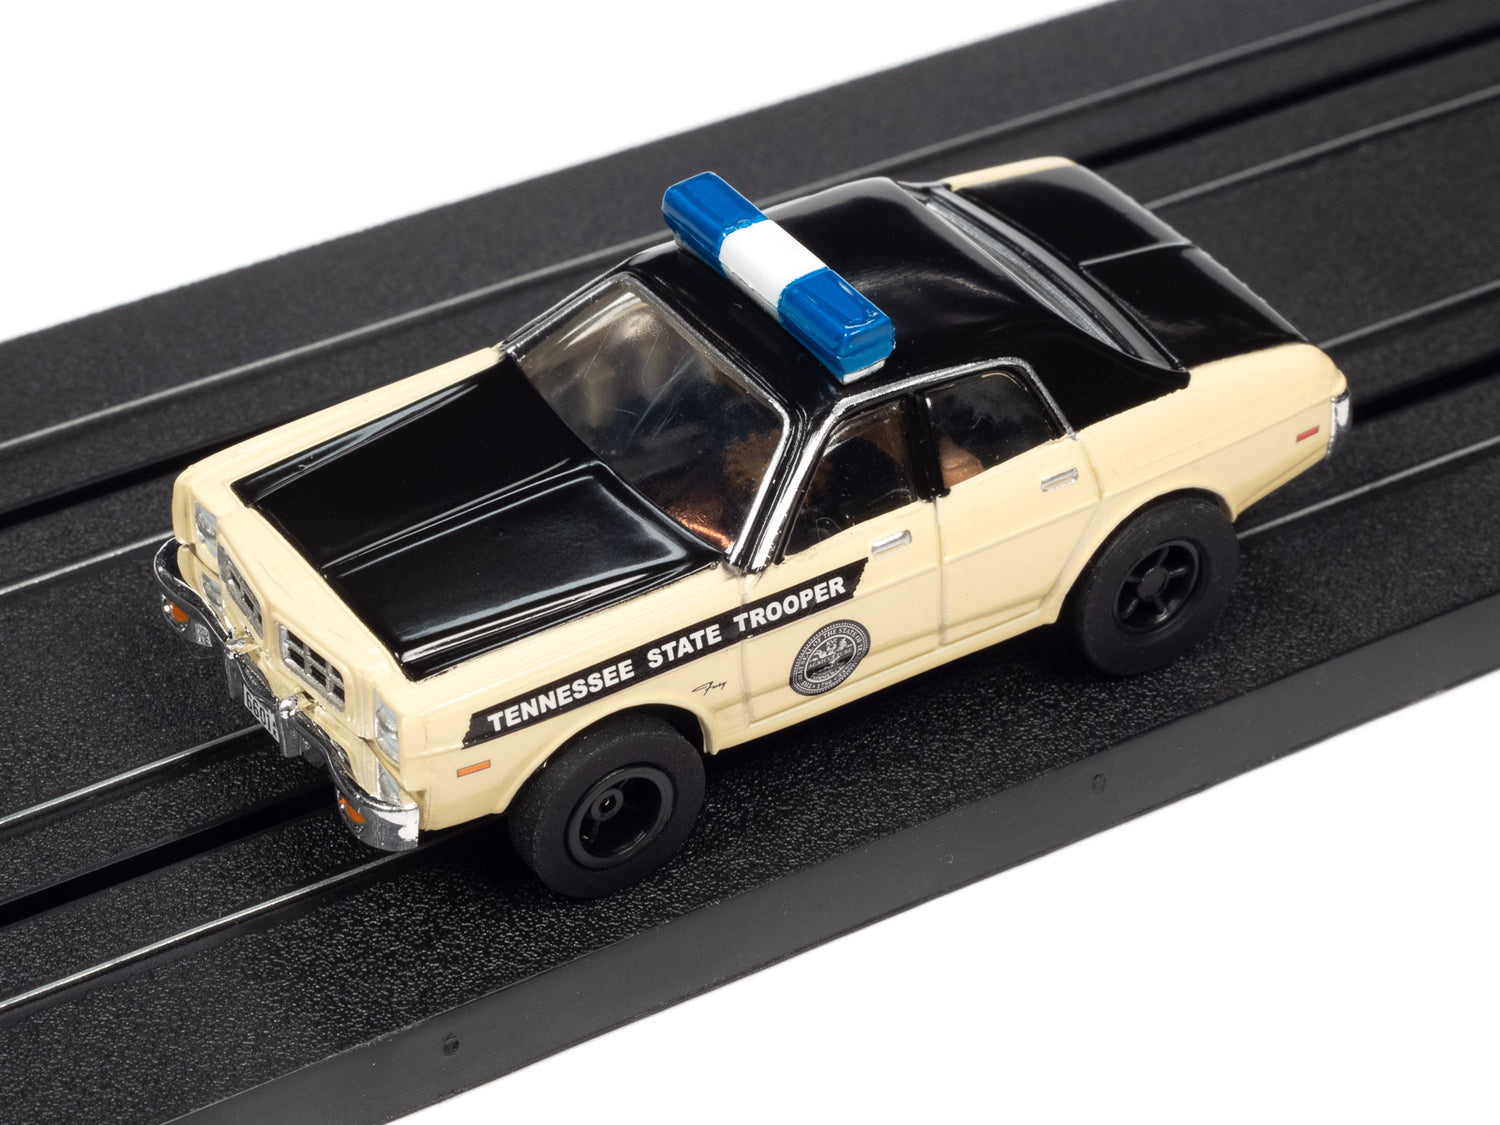 Auto World Xtraction 1978 Plymouth Fury Tennessee State Trooper HO Scale Slot Car